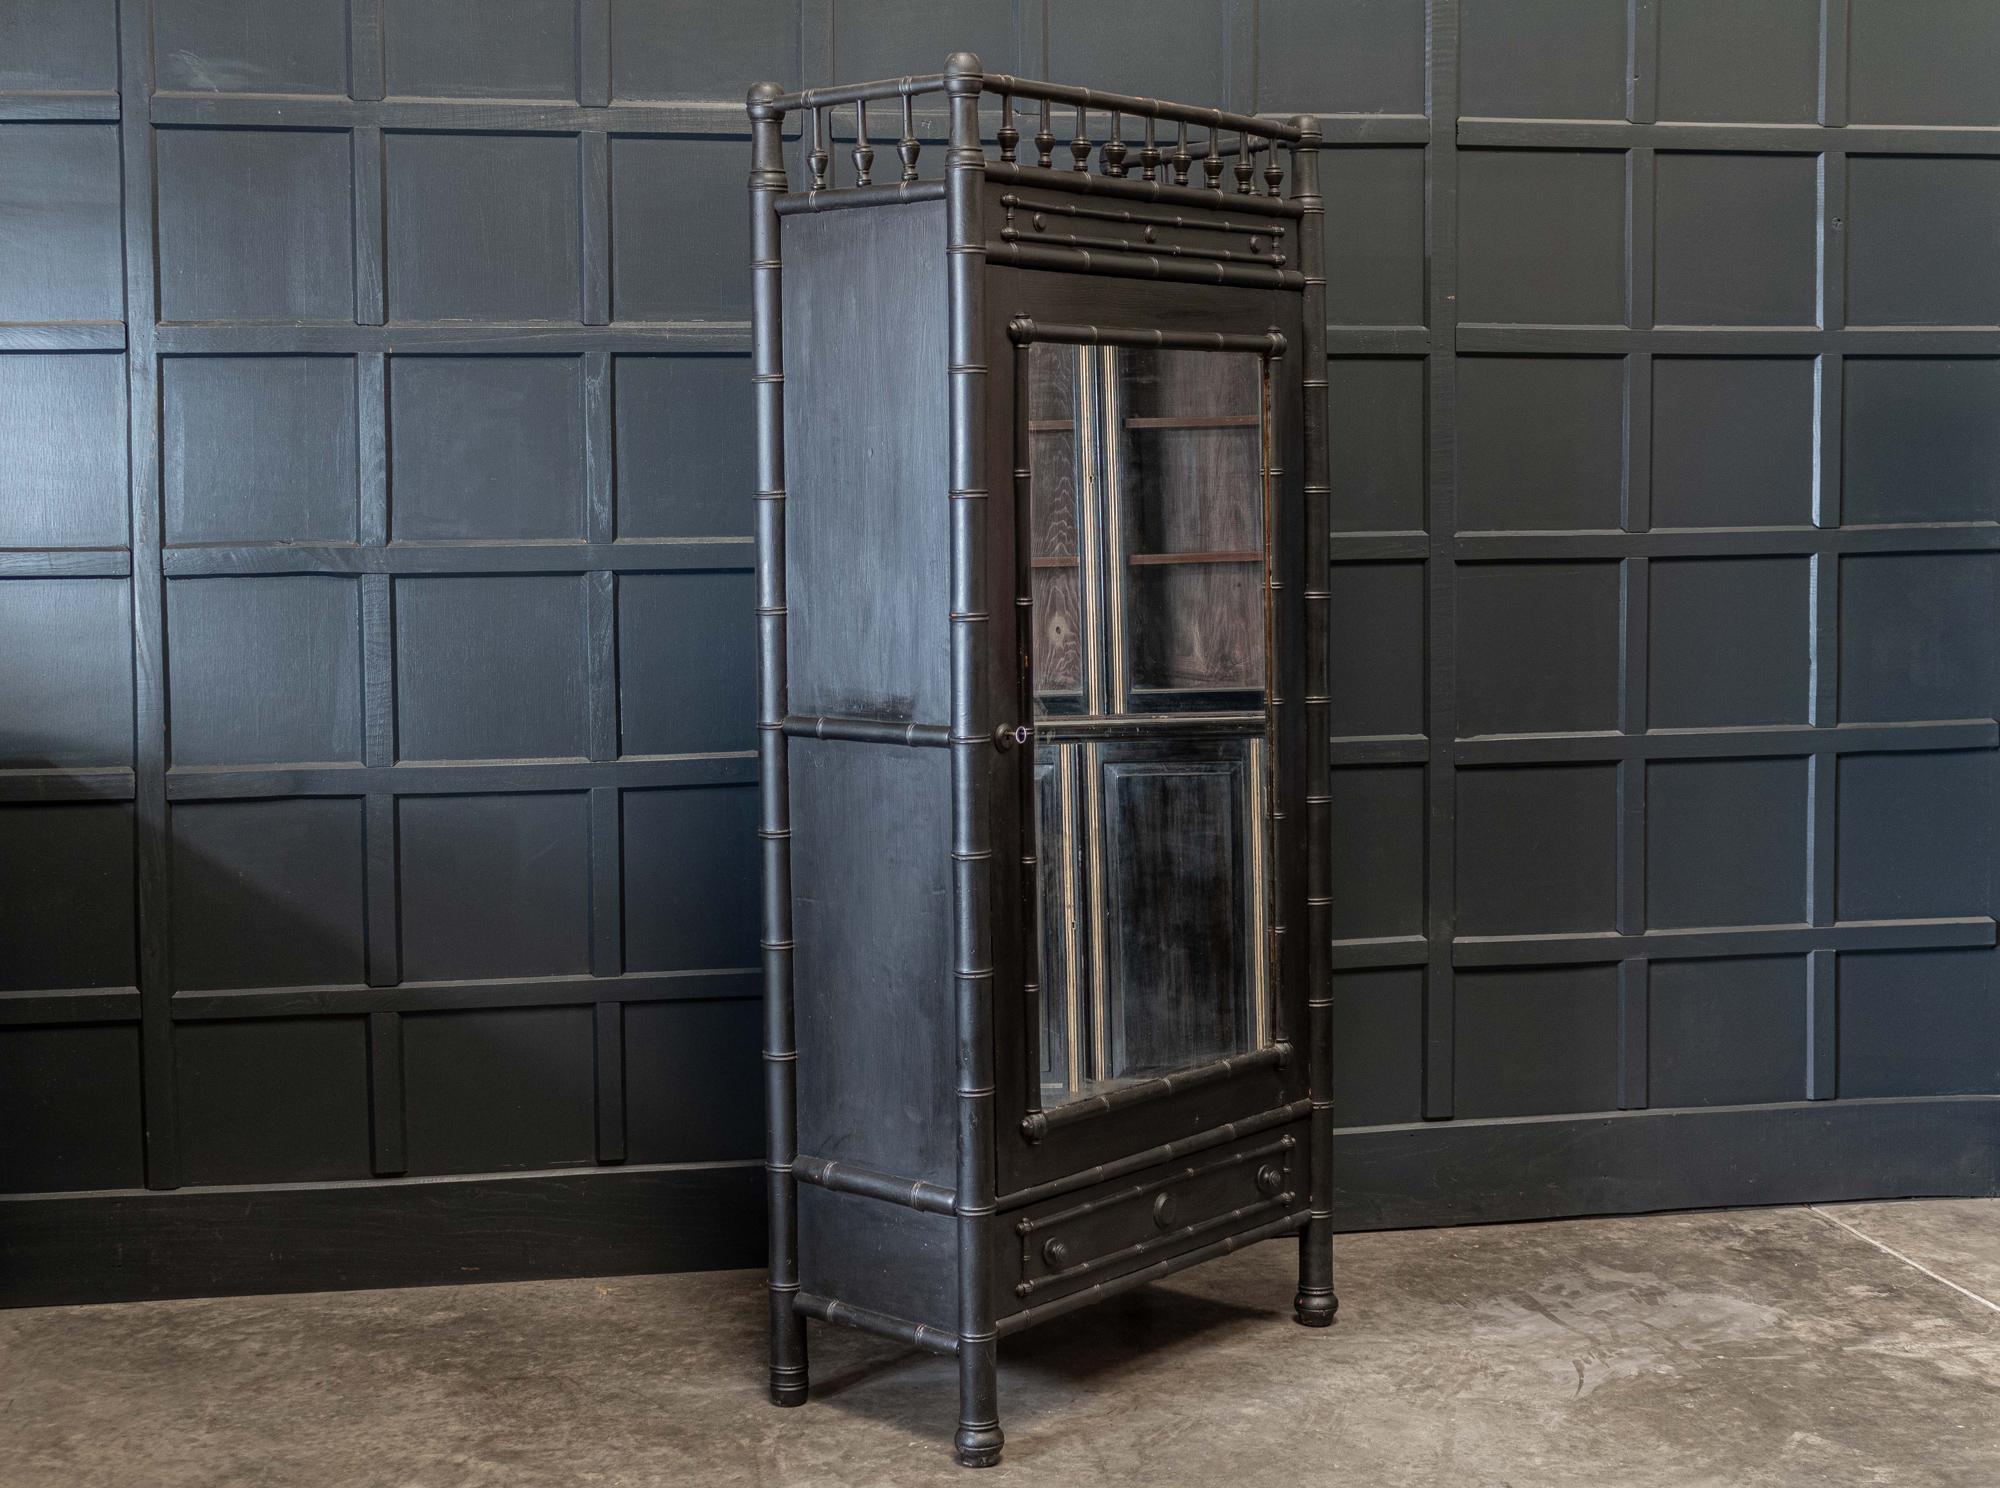 Circa 1860.

19thC French faux bamboo ebonised mirrored armoire.
With original mirror plate, shelving, hardware and key.

Sourced from the South of France

sku 691

Measures: W 95 x D 46.5 x H 211cm.

 